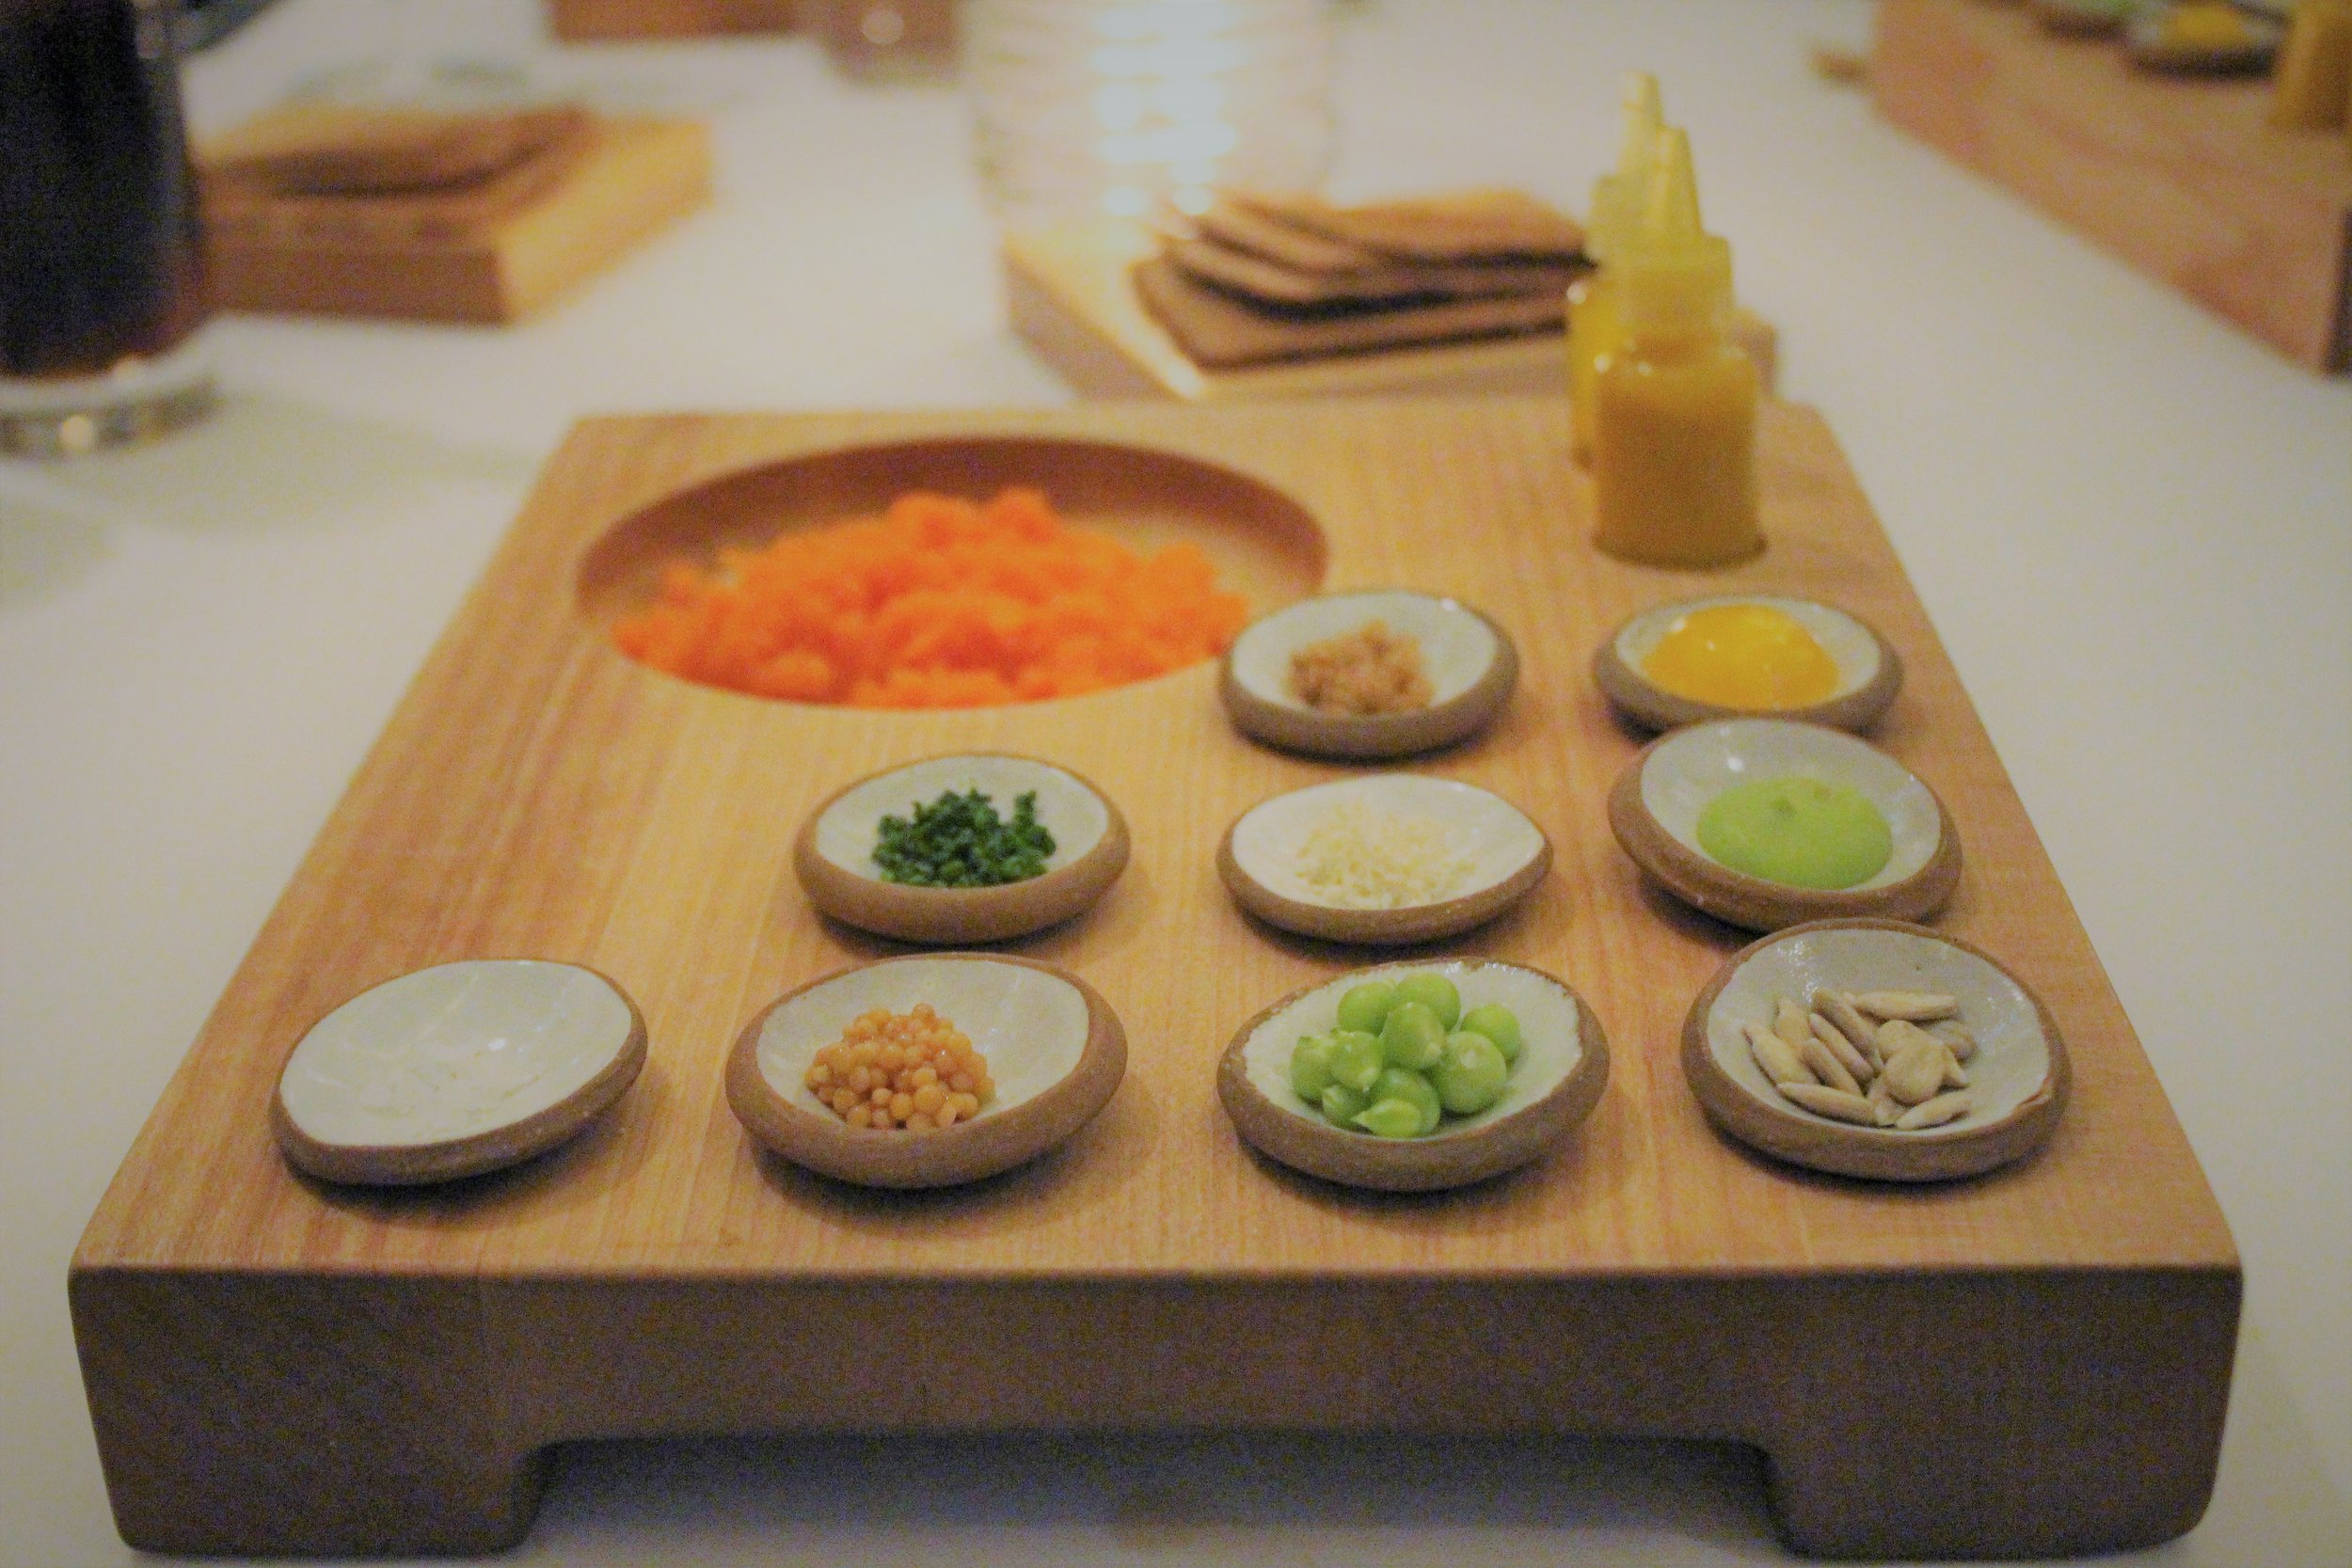 2012 Carrot Tartare with Rye Toast and Condiments at EMP in New York City